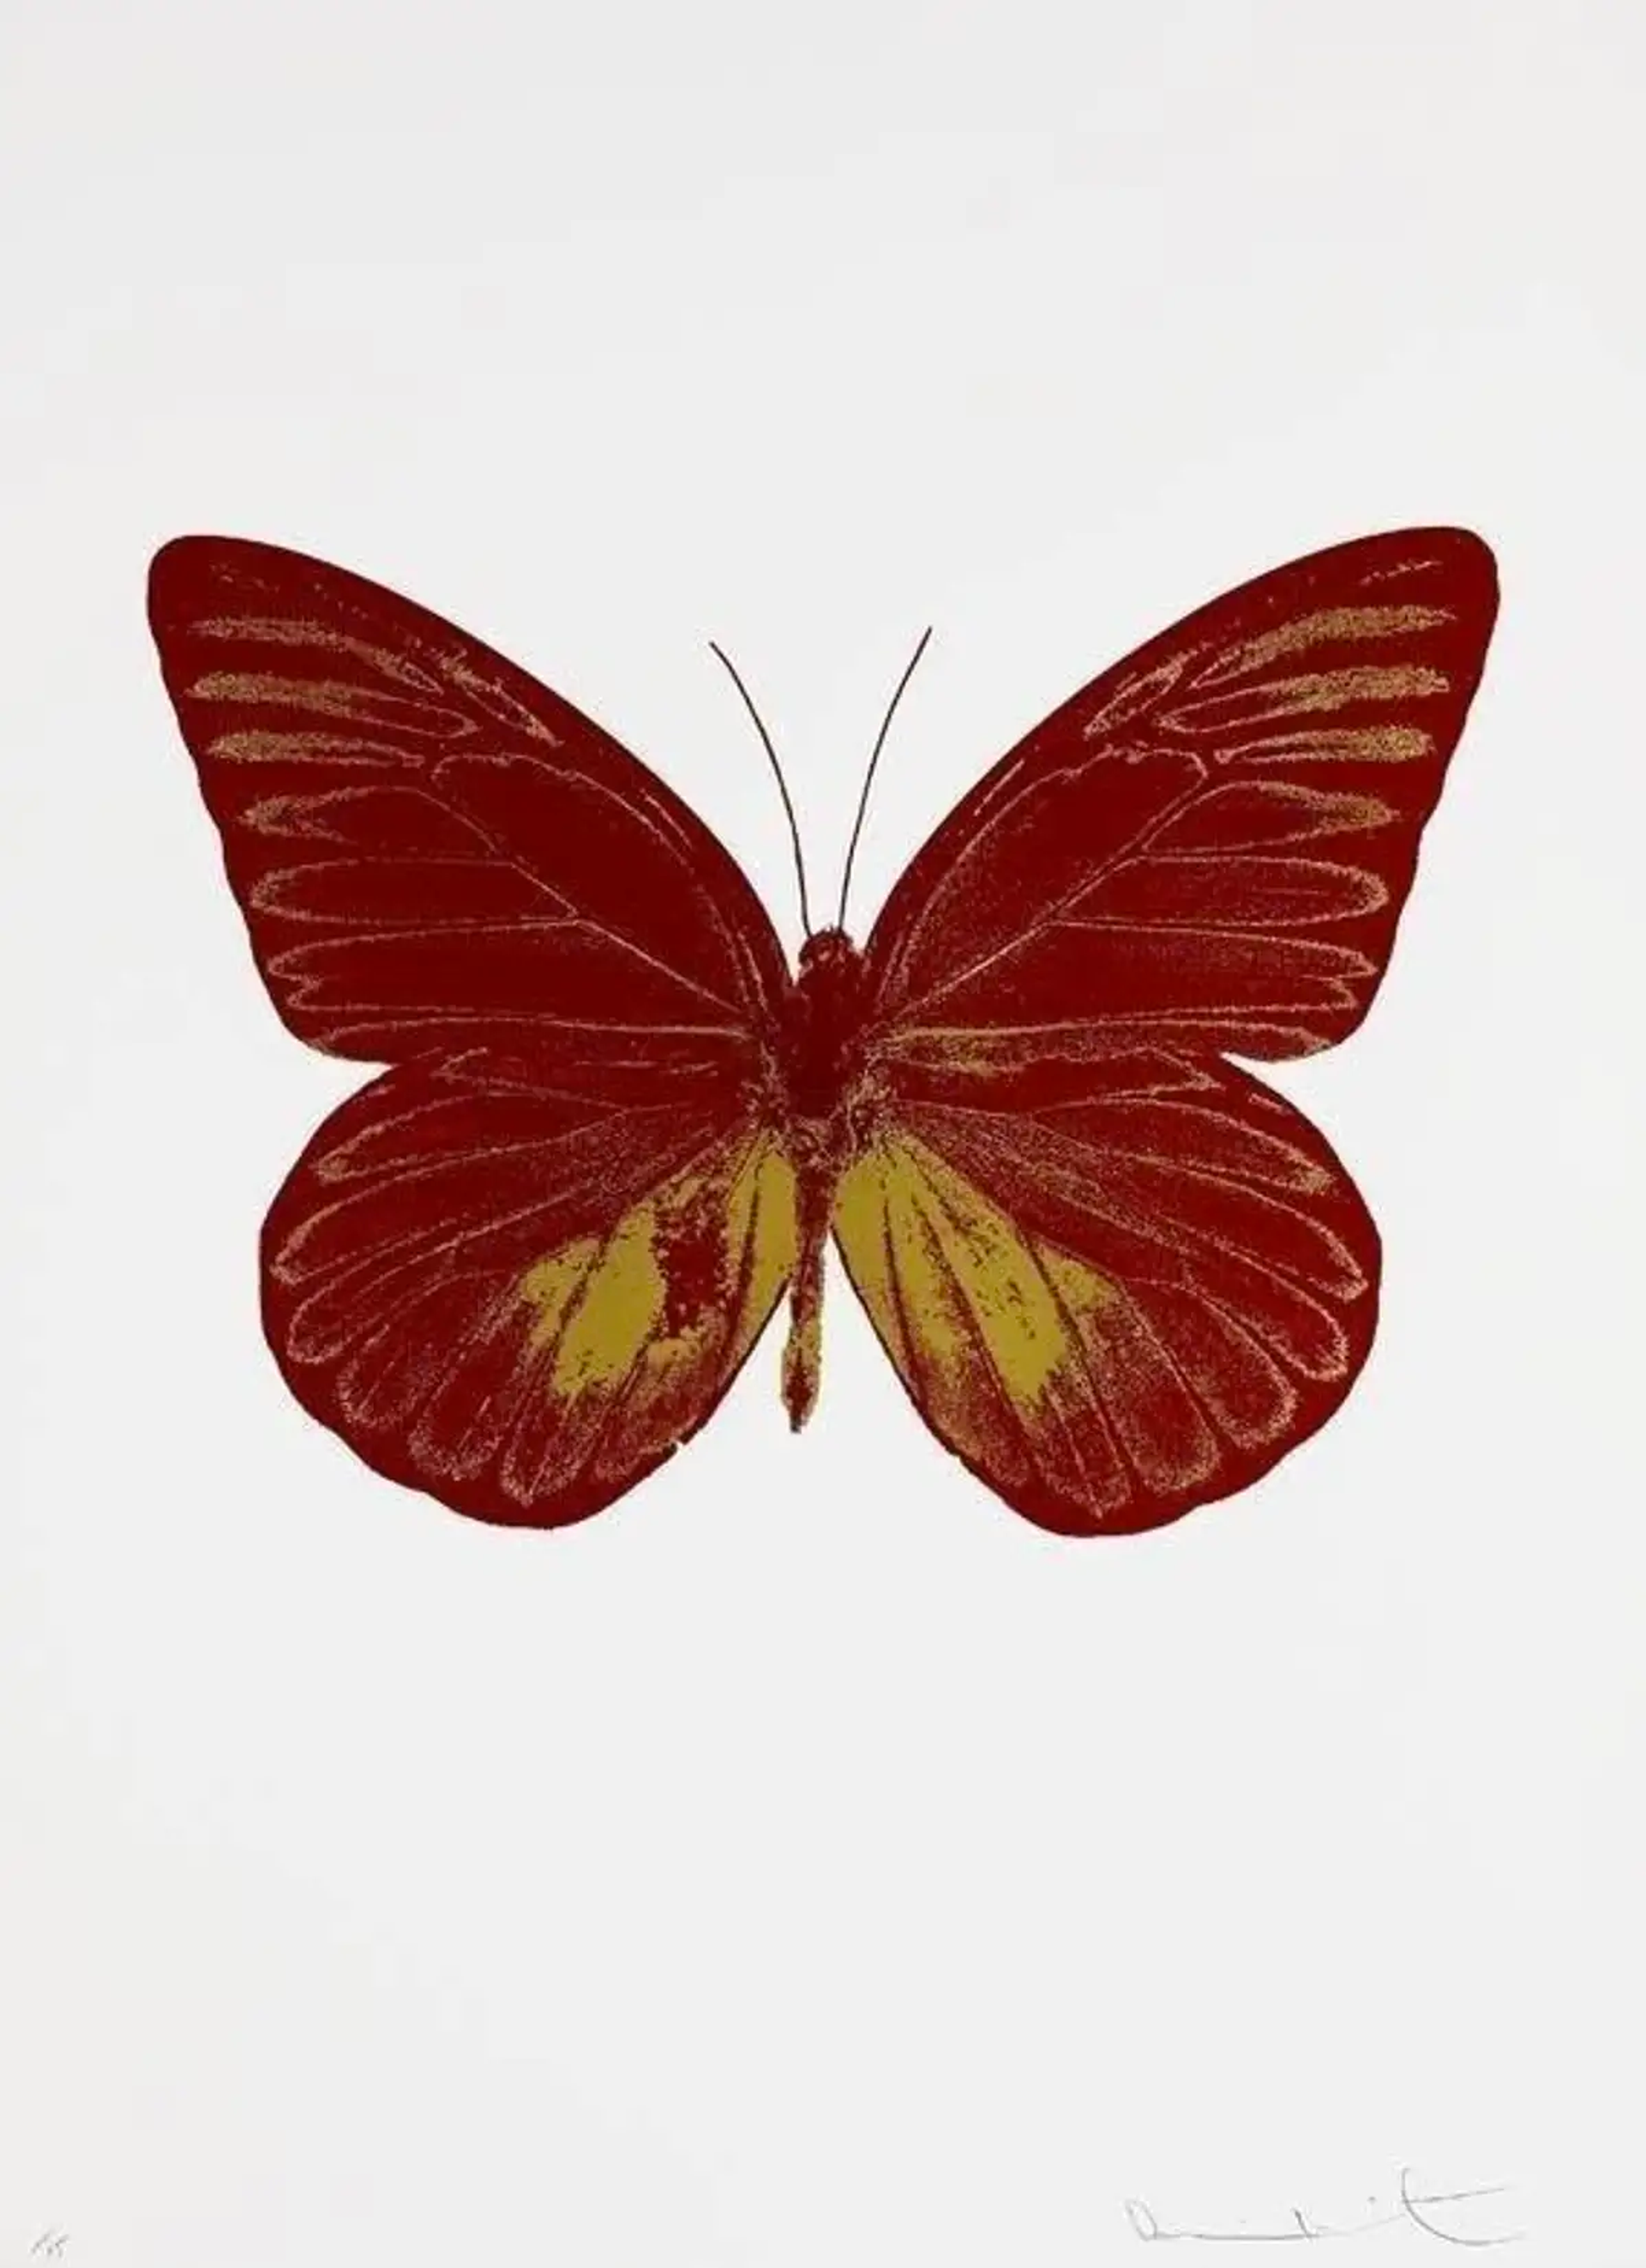 The print shows a large butterfly with its wings outspread, set against a white backdrop. Depicted in red and gold, the image of the butterfly has been rendered flat and simplified into block colours, obscuring the fine detail of the real butterfly wings.